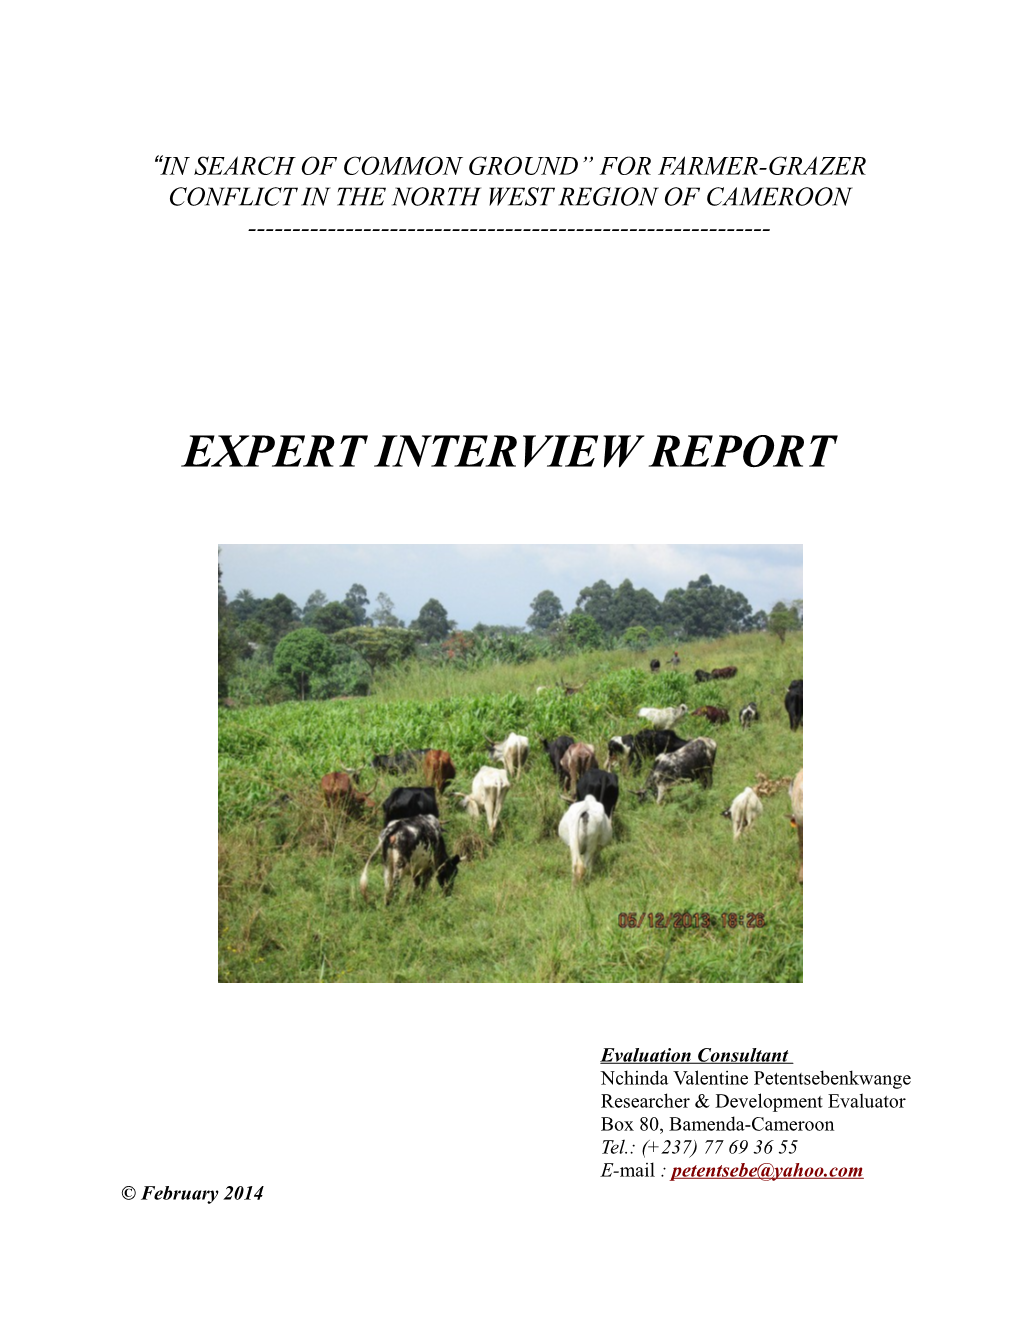 In Search of Common Ground for Farmer-Grazer Conflict in the North West Region of Cameroon